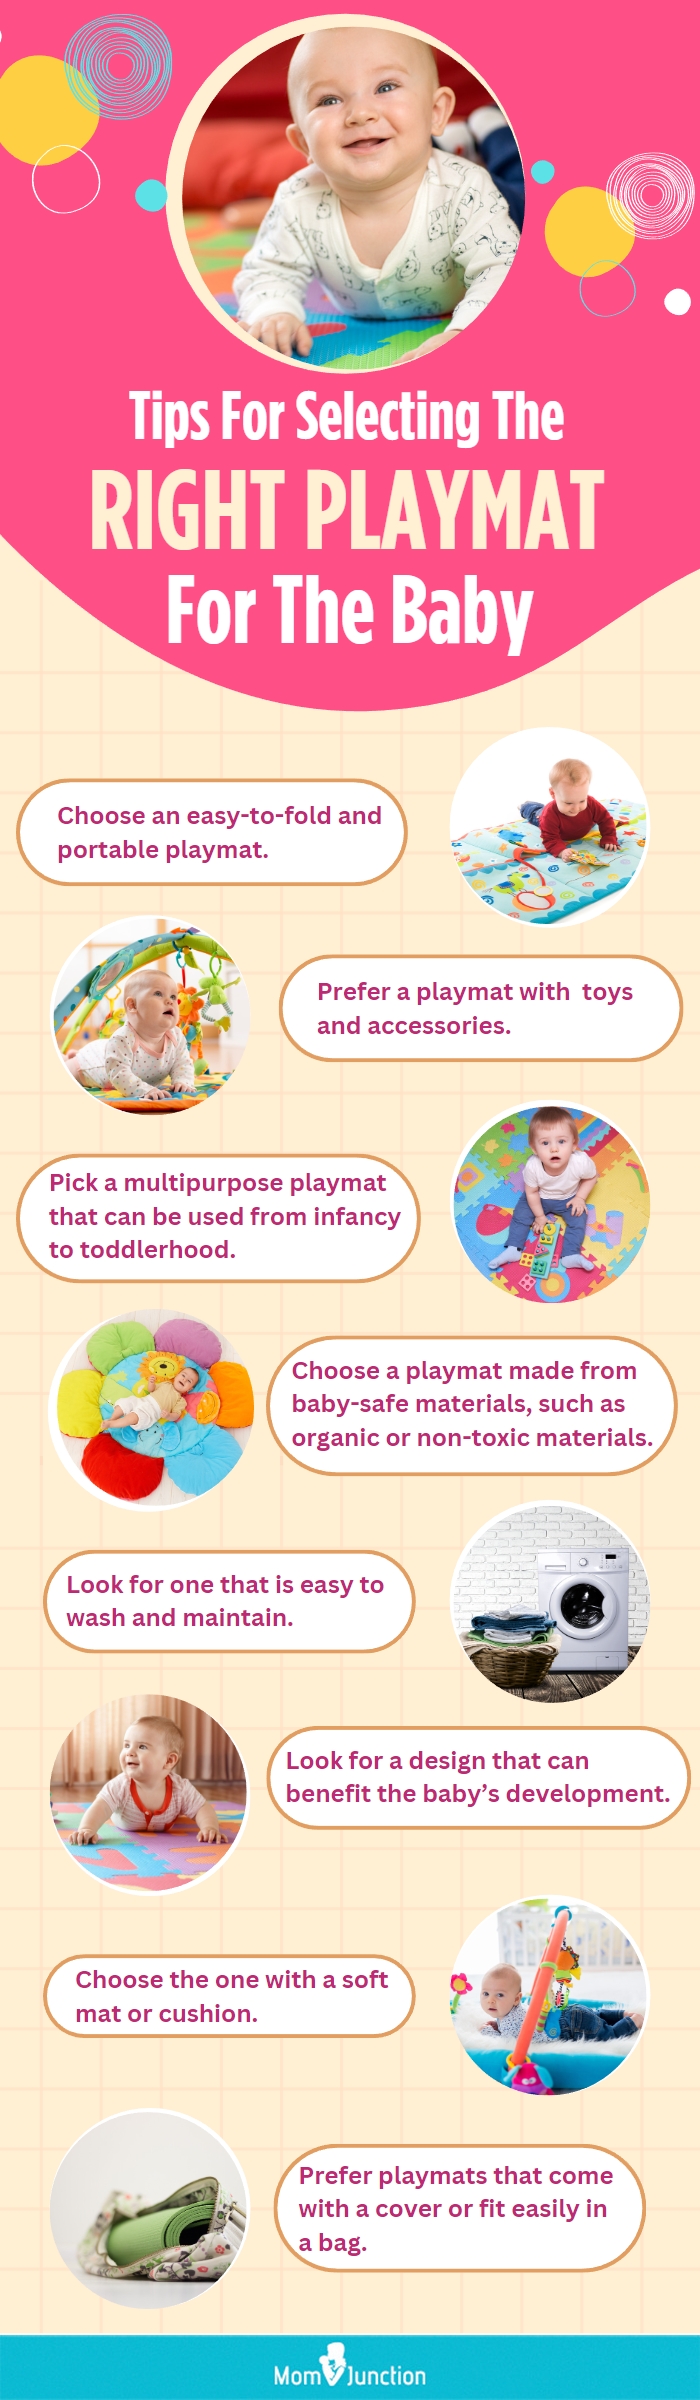 Tips For Selecting The Right Playmat For The Baby (infographic)